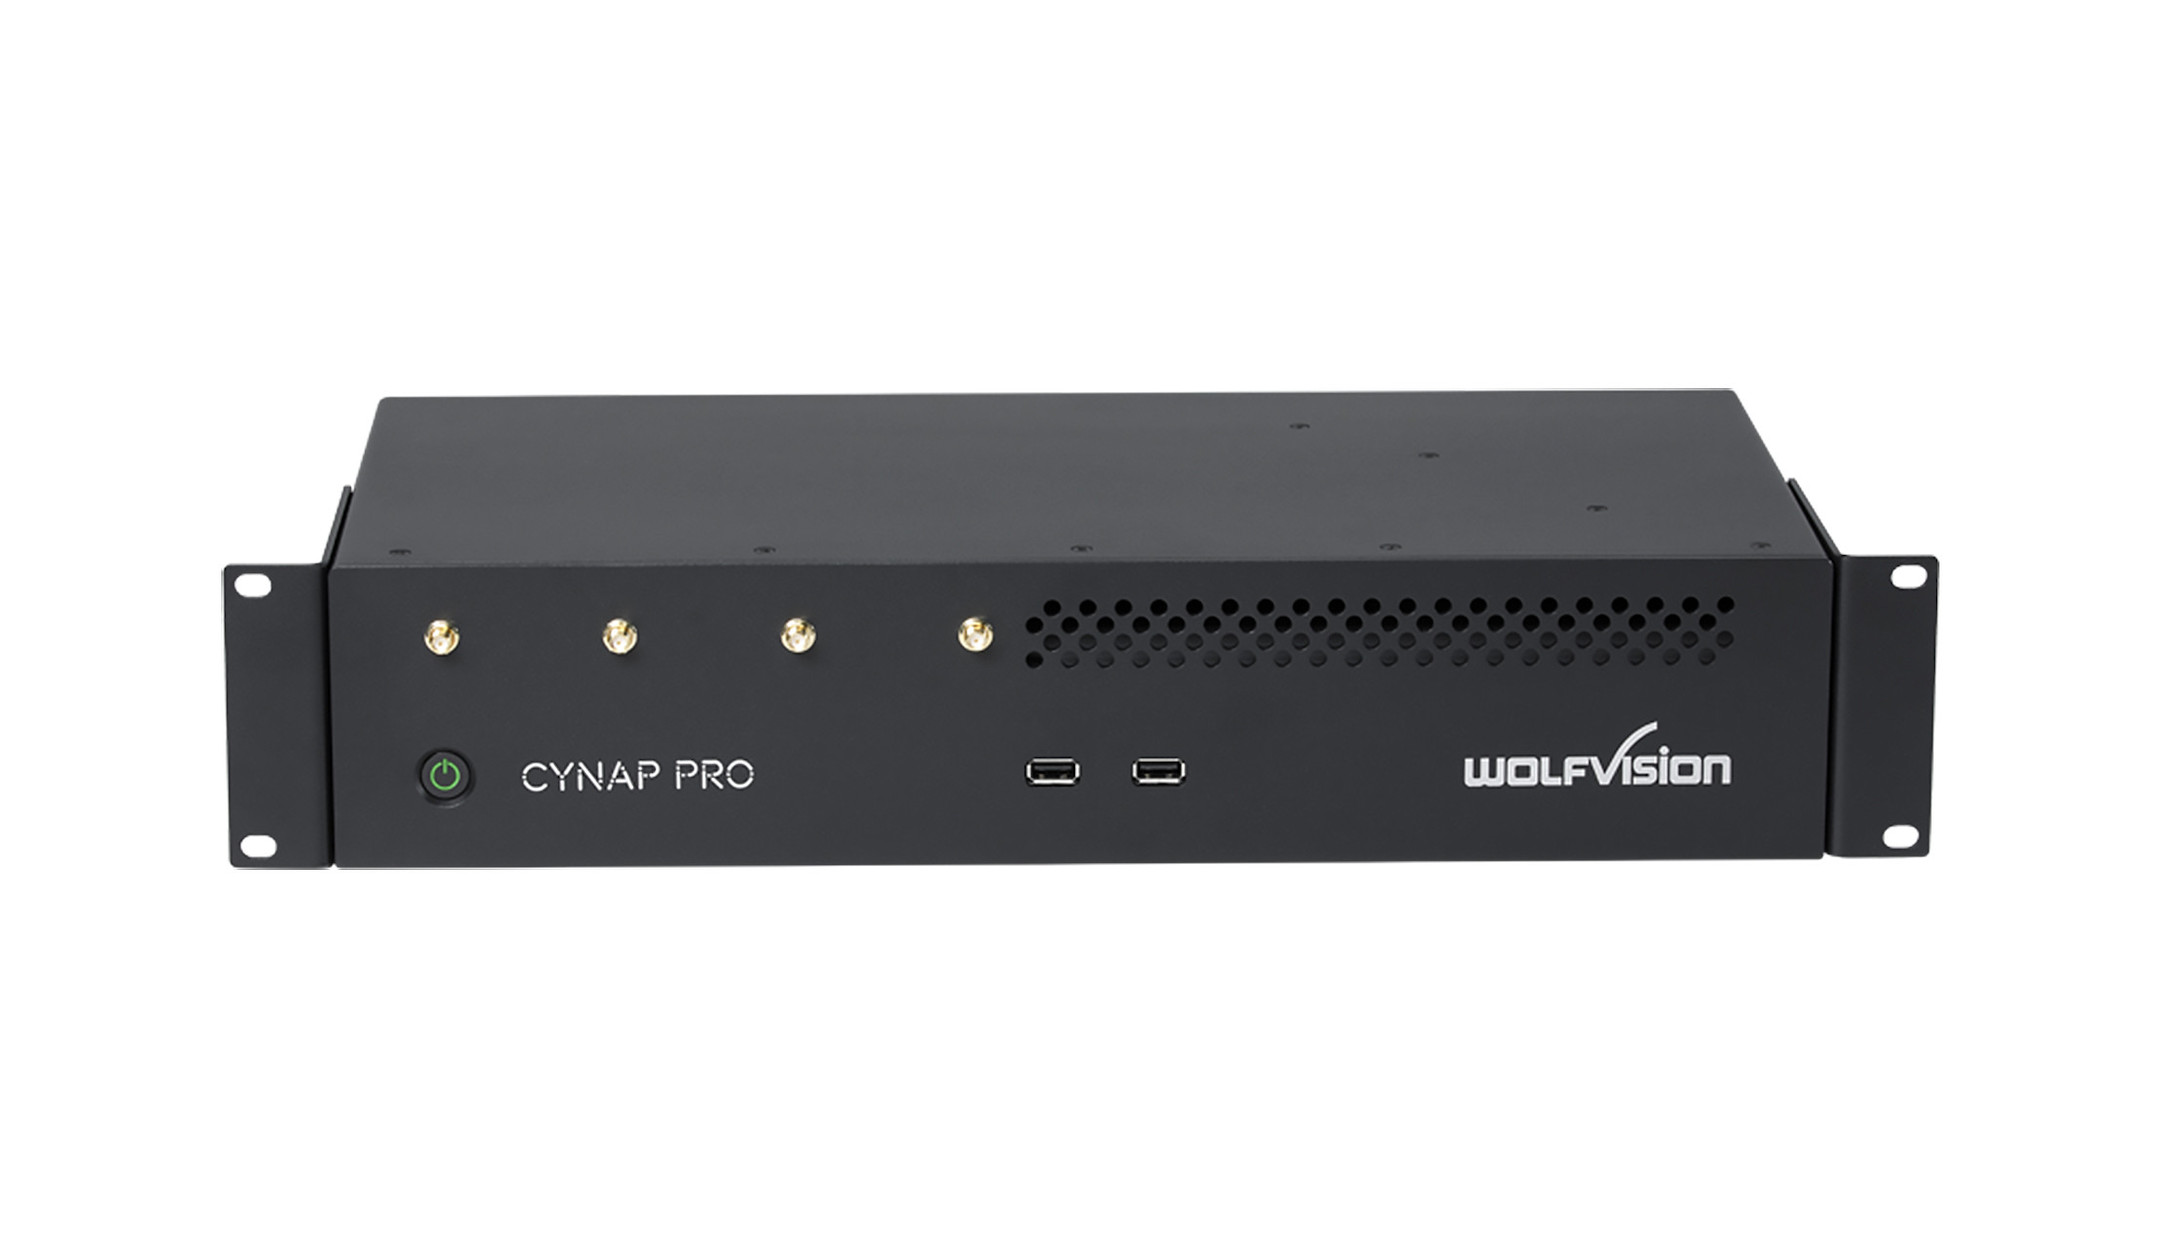 Wolfvision-Cynap-Pro-HDMI-Version-A-drahtloses-All-in-One-Prasentationssystem